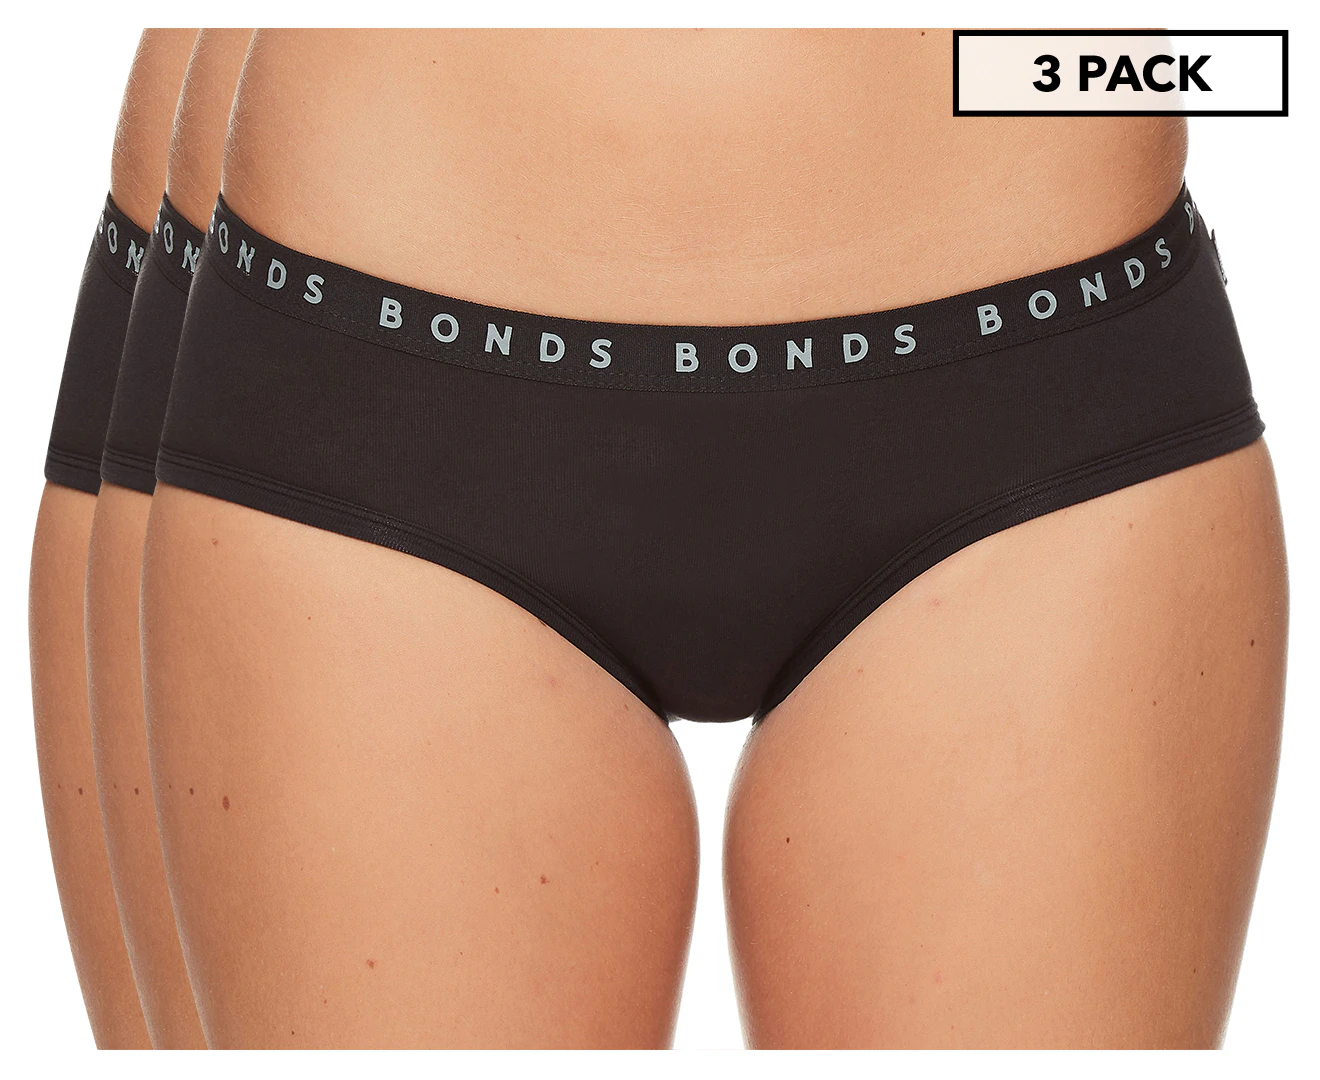 Shop Full Briefs For Less, Save BIG on Fashion Apparel Goods